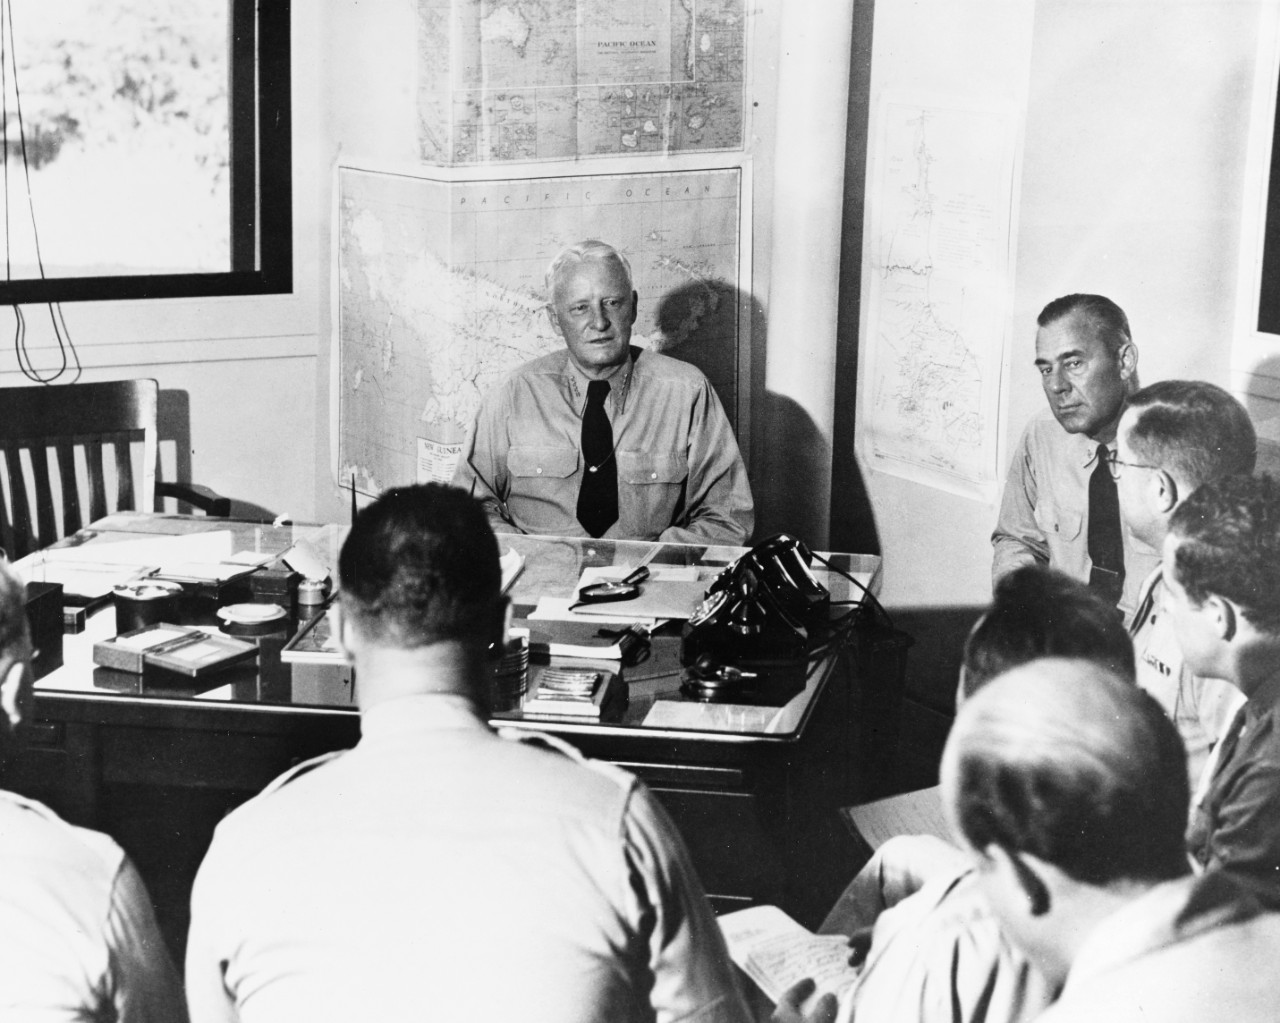 Gives his fifth press conference of the war at Pacific Fleet Headquarters, Pearl Harbor, 24 November, 1942. At right, is Assistant Chief of Staff CAPT L.J. Wiltse.